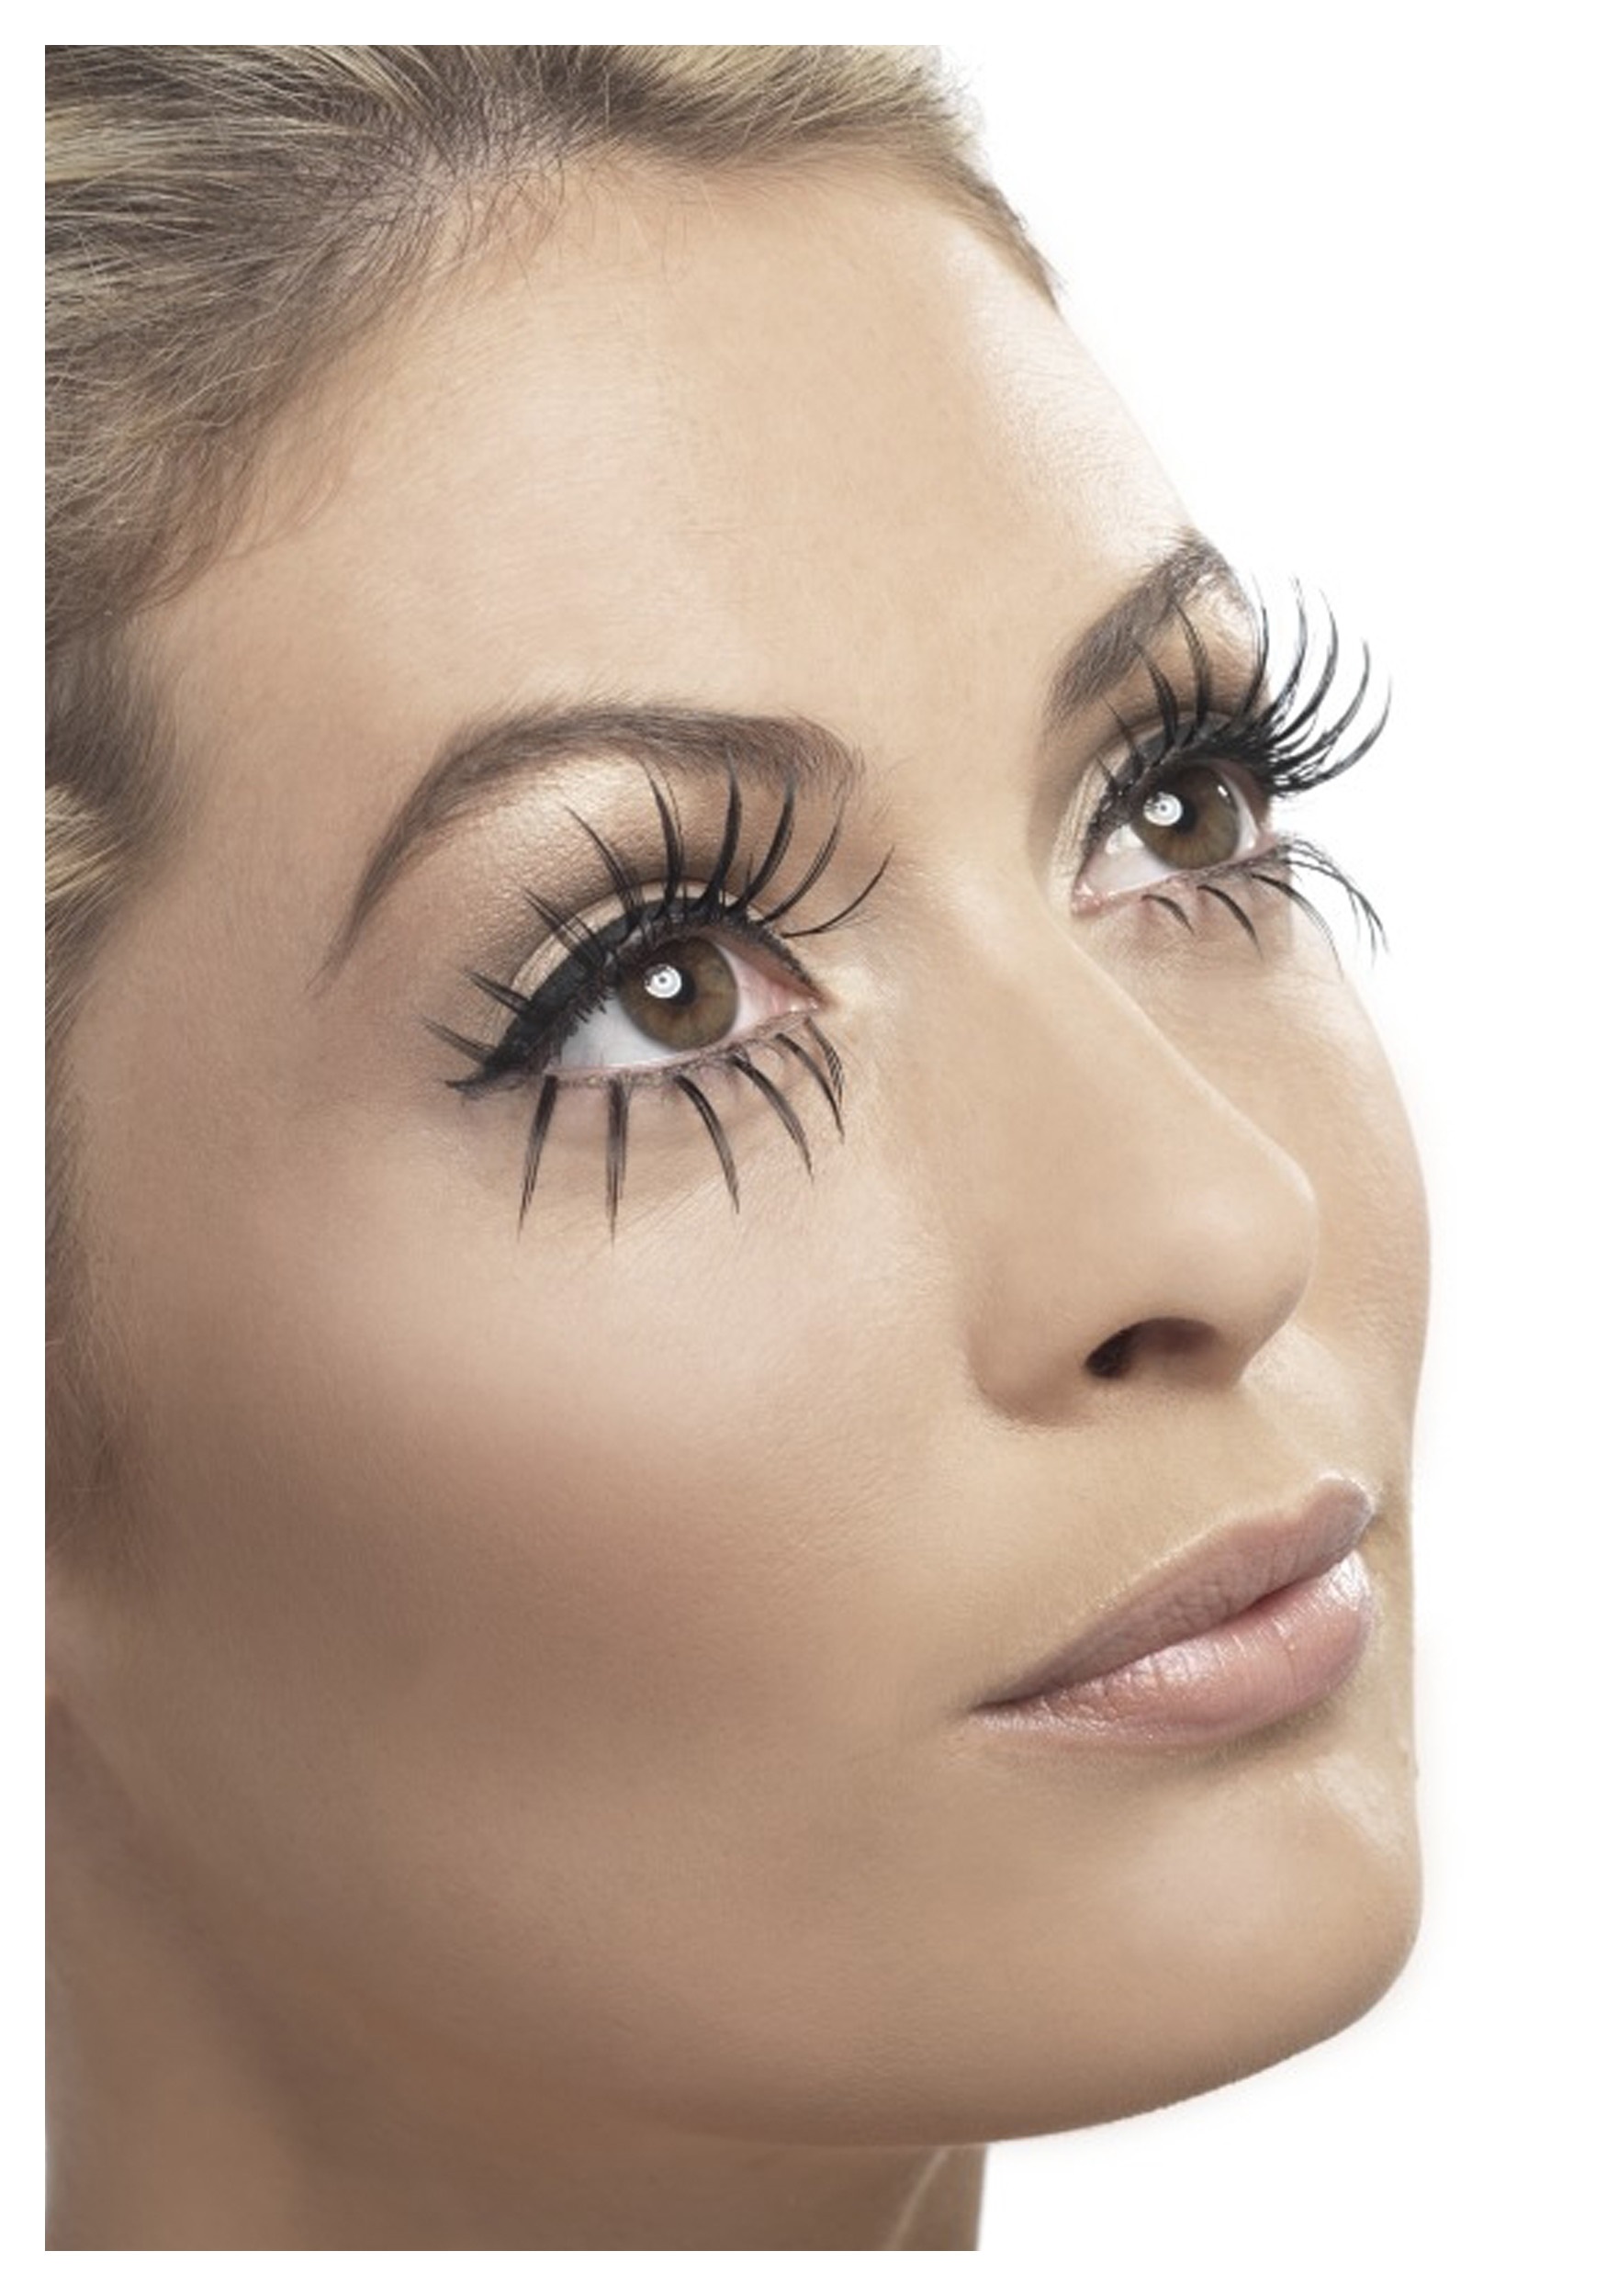 Did you know that having a lash lift regularly can make your